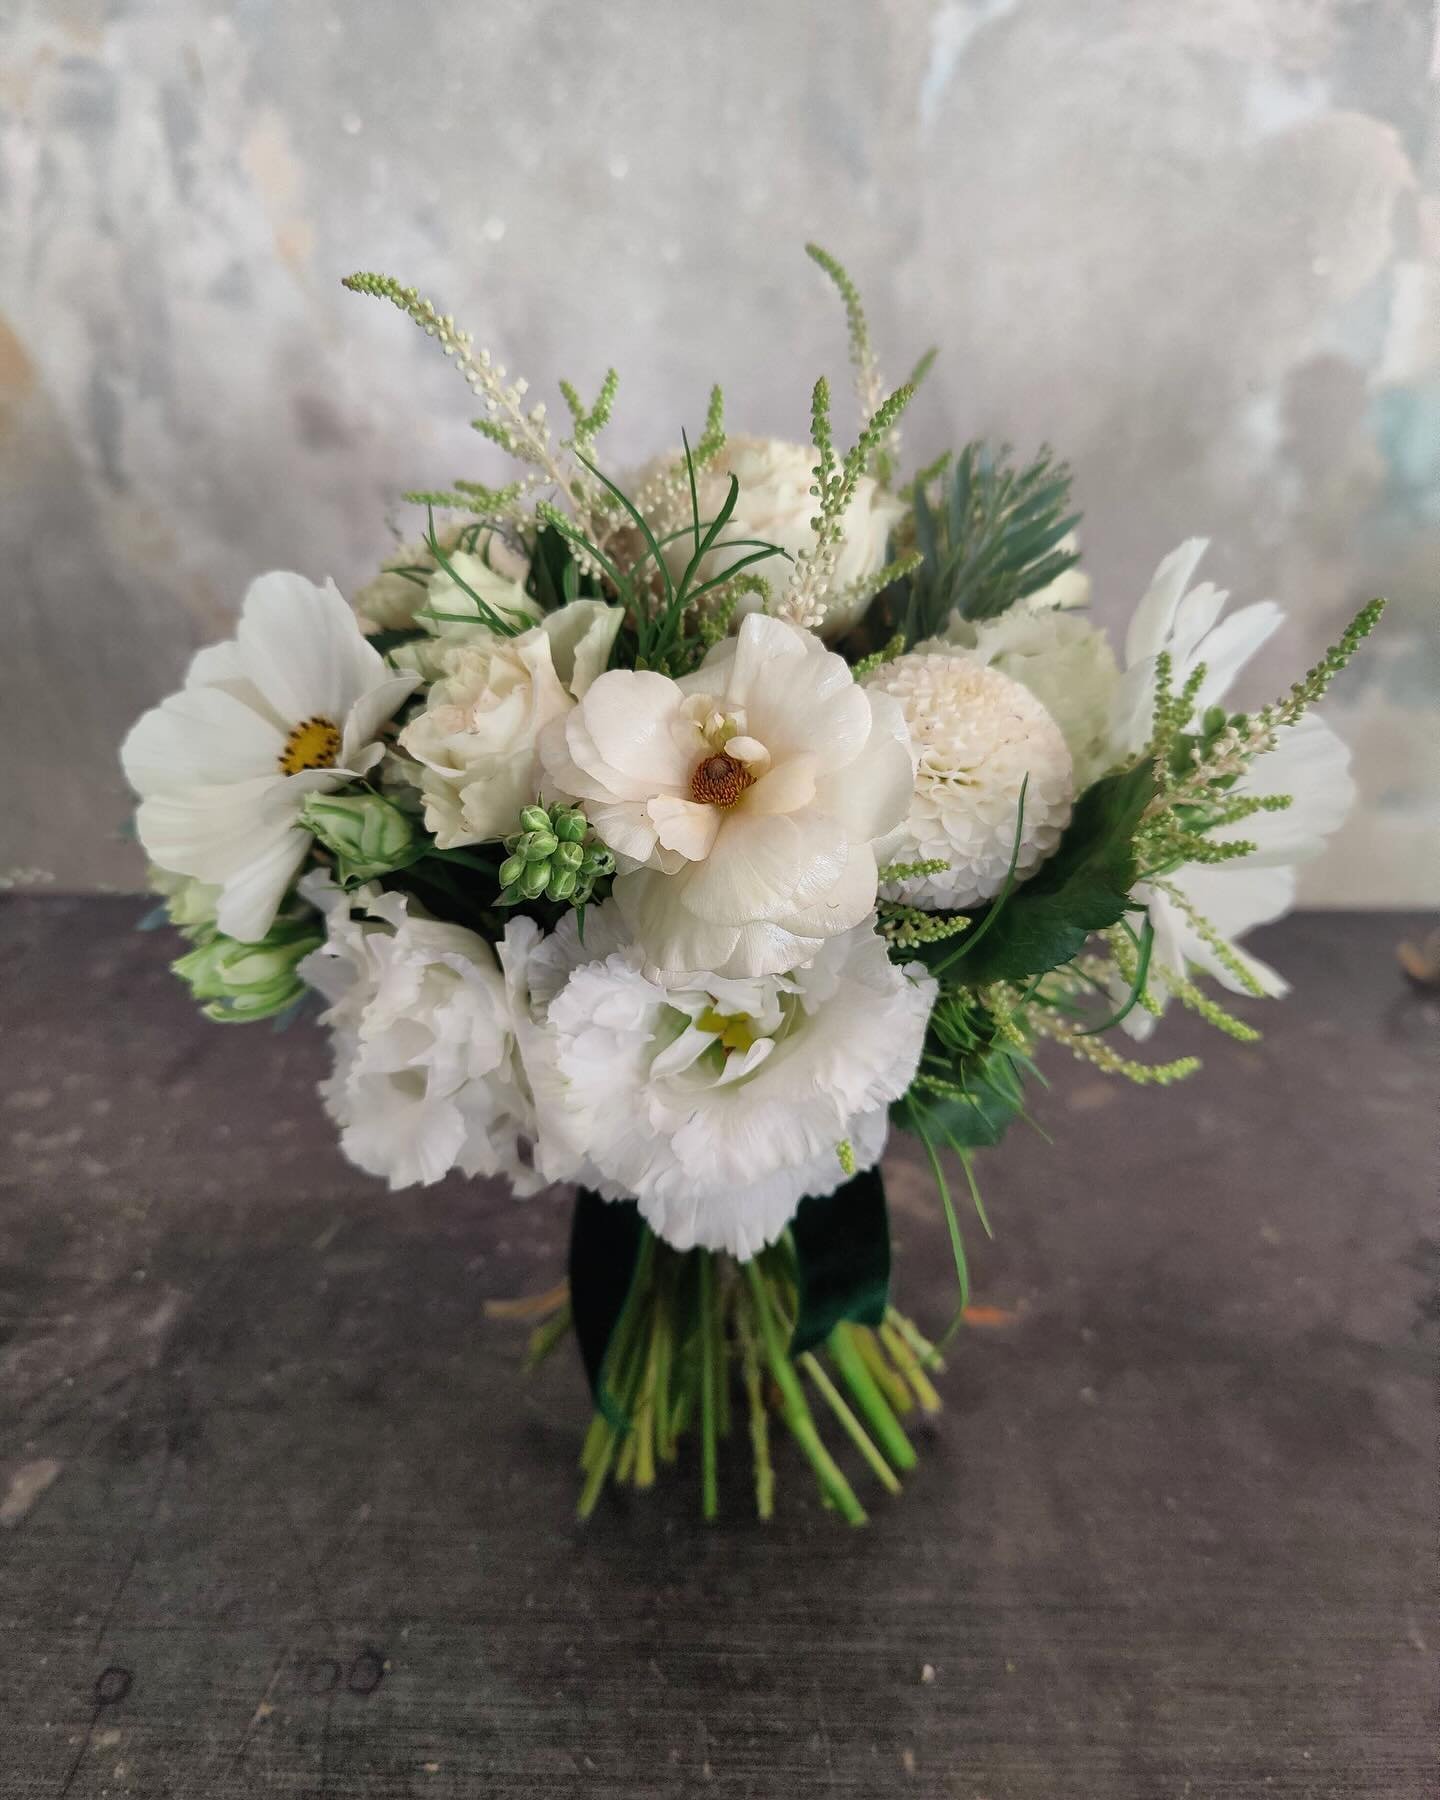 R E A D Y ? 🤍
.
Looks like you are! Orders for our gorgeous Ready To Wear Collection online wedding flowers are pinging in! 🤍
.
So if you&rsquo;re getting hitched and want to keep it simple AND keep keep it utterly beautiful without it costing the 